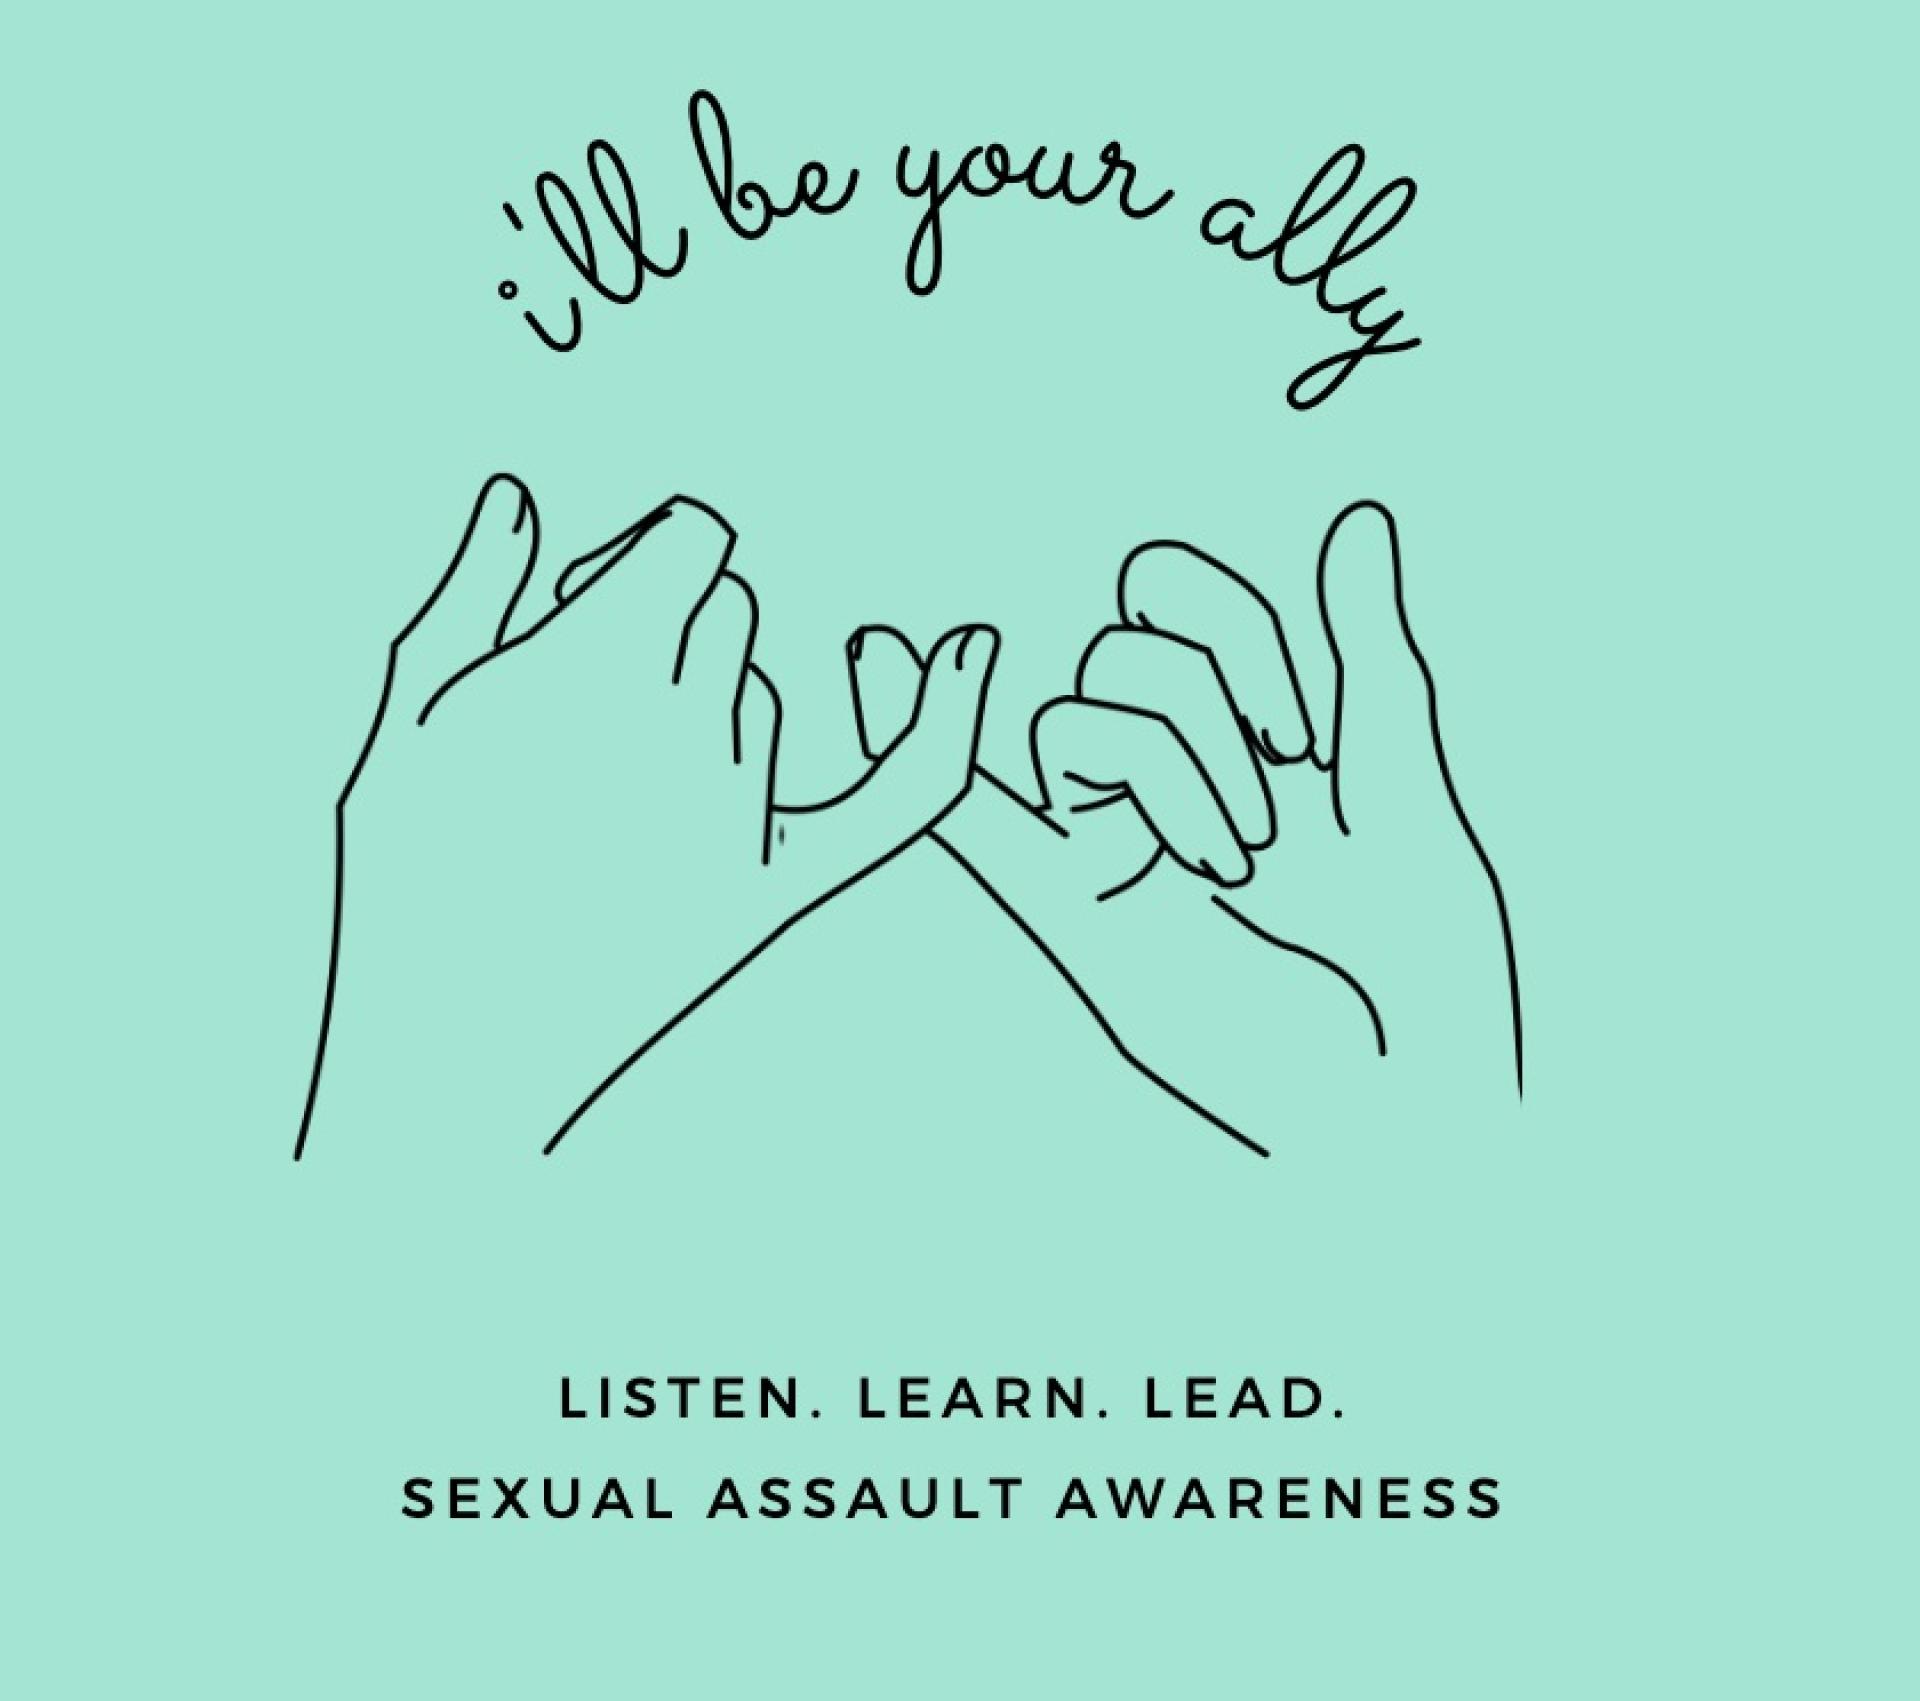 A sticker created by North Central College marketing students for the Be an Ally campaign.